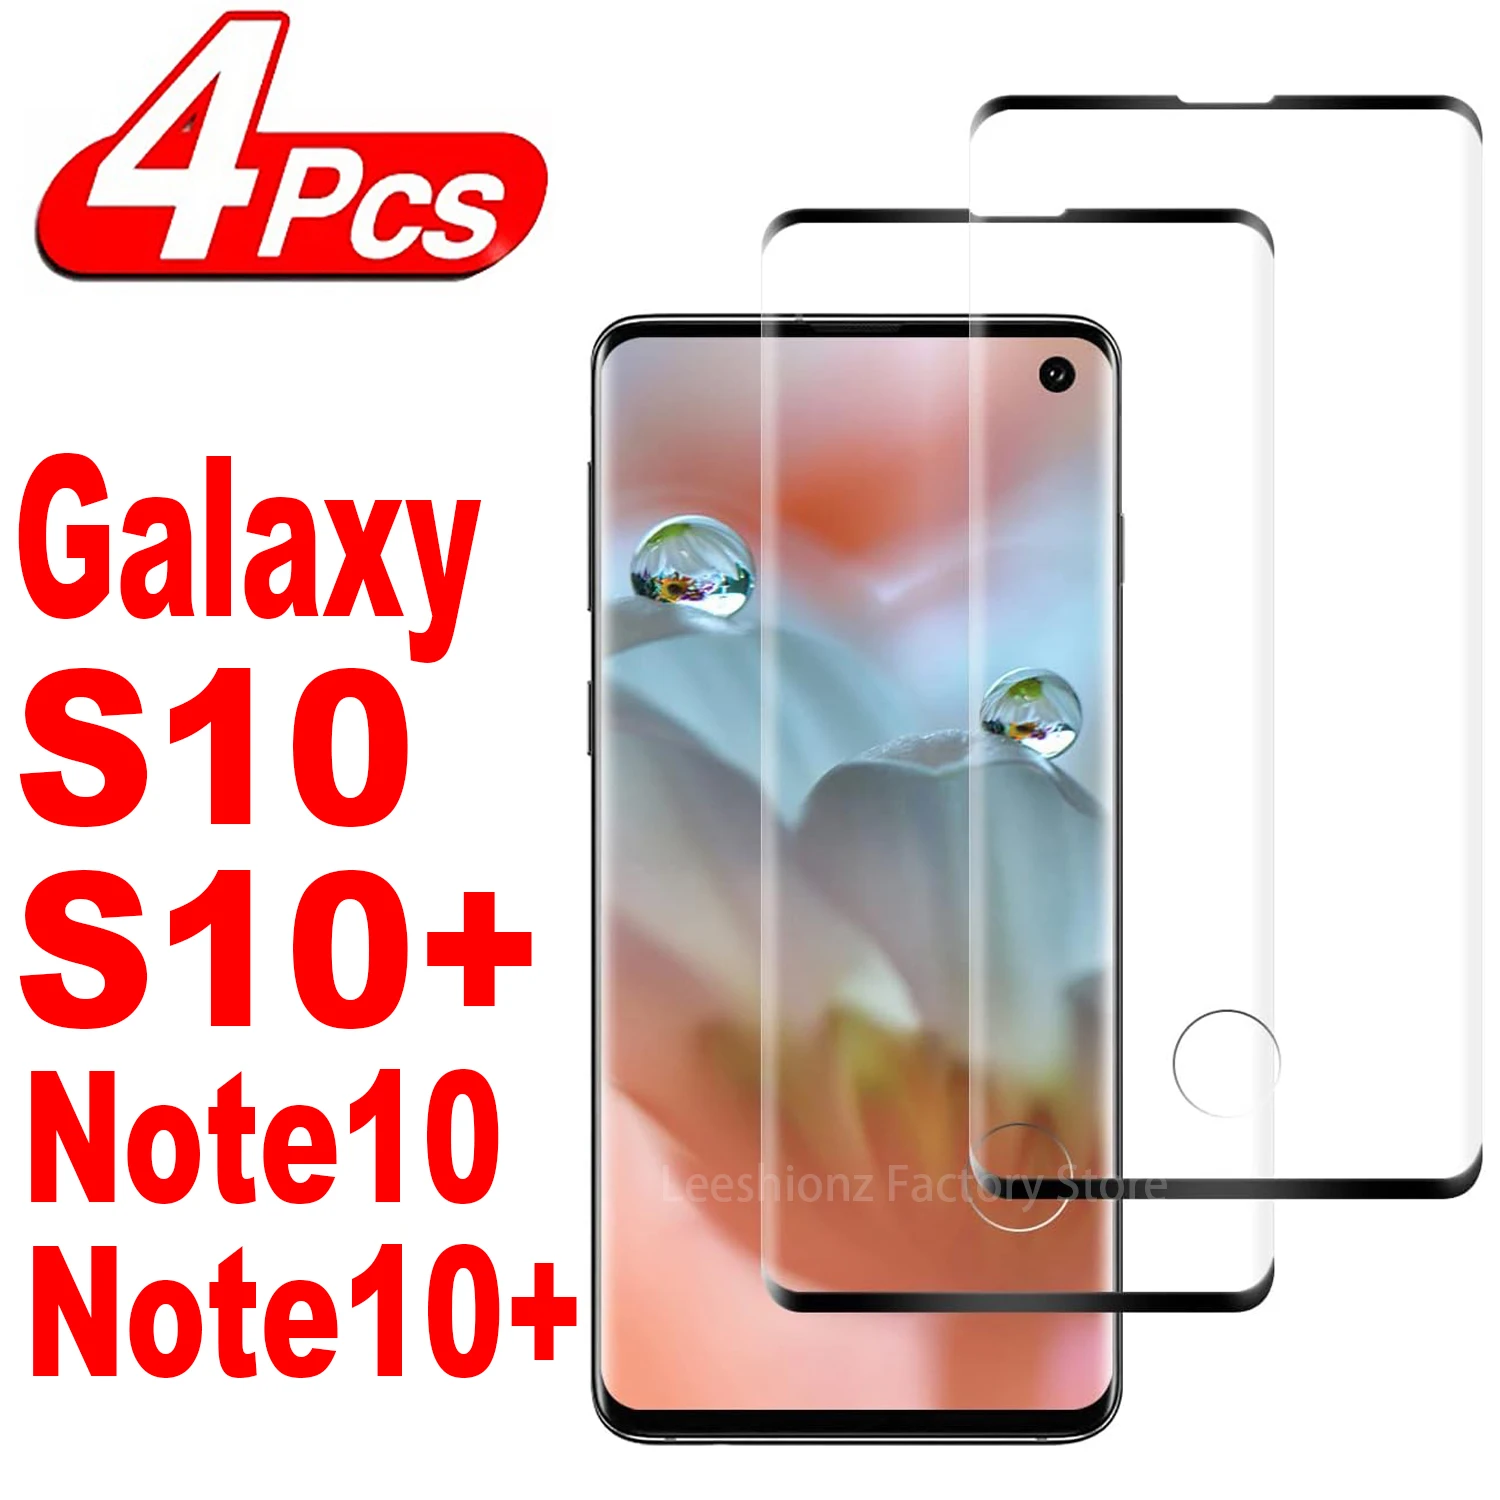 1/4Pcs 3D Screen Protector Glass For Samsung Galaxy S10 S10+ Note 10 Plus Note10+ Tempered Glass Film ymj laminating mold for s10 5g g977 lcd display touch screen glass oca location mould s8 s9 s10 plus note10 note10 mate20 pro